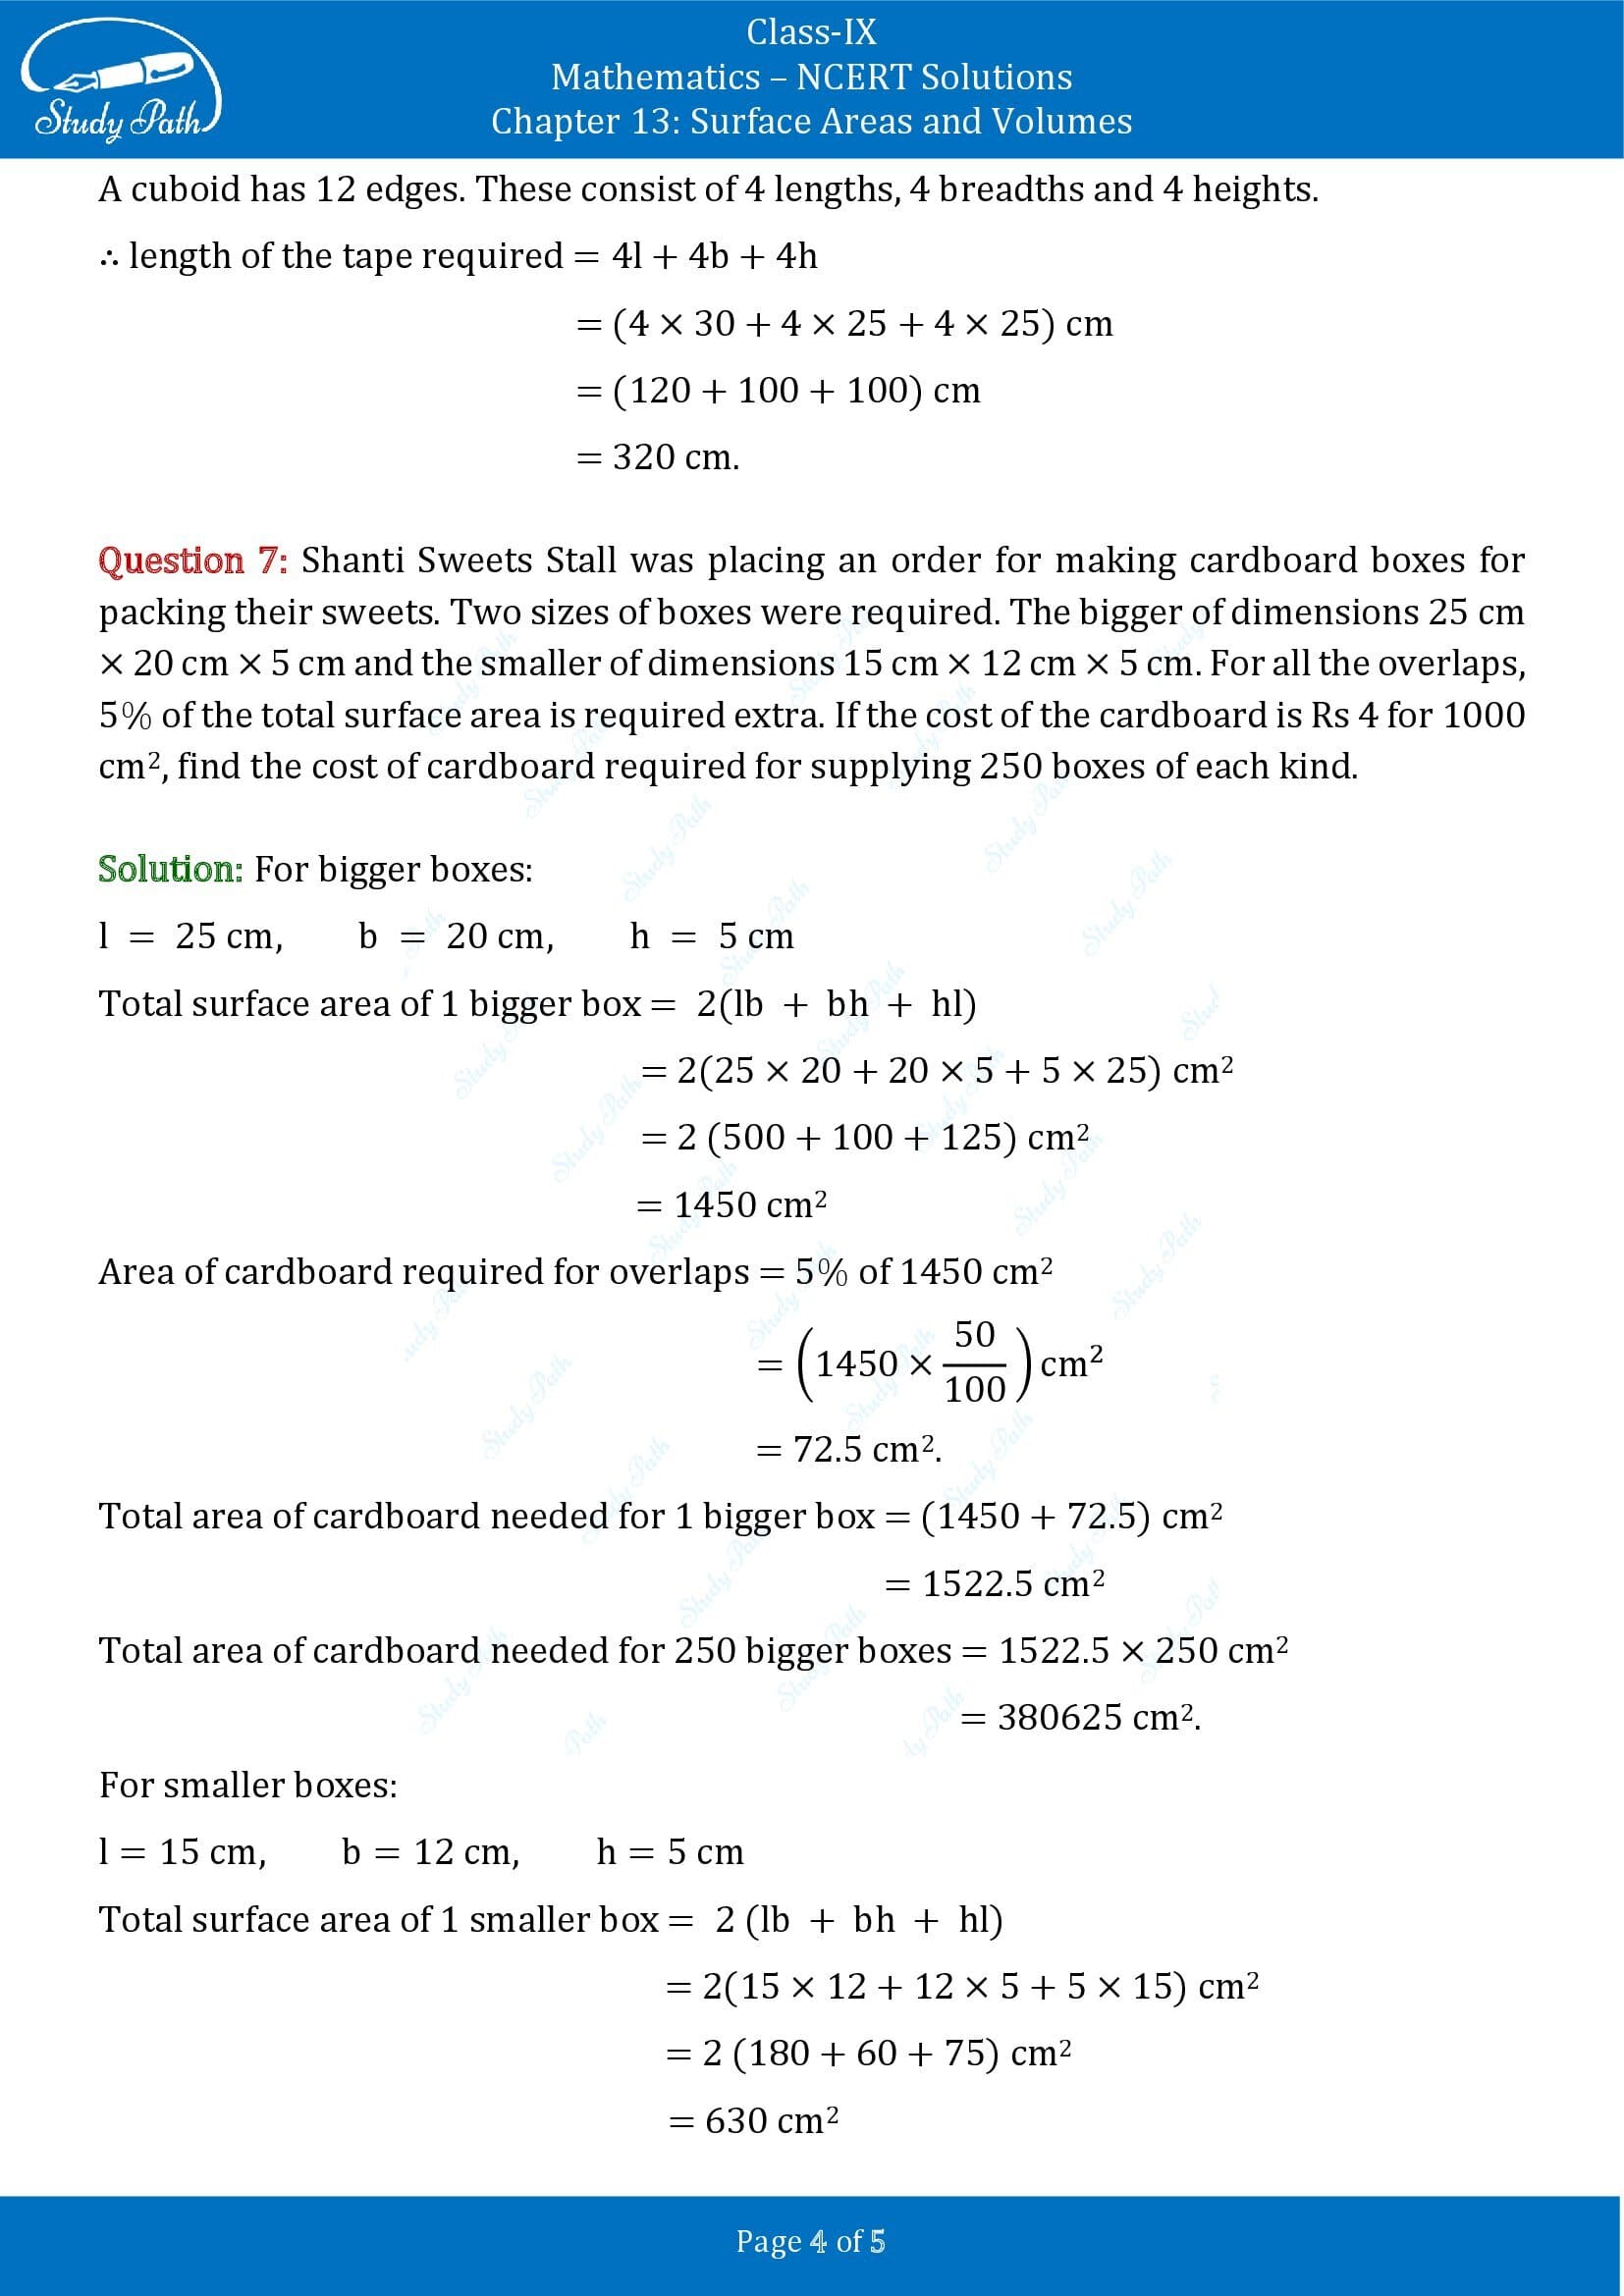 NCERT Solutions for Class 9 Maths Chapter 13 Surface Areas and Volumes Exercise 13.1 00004